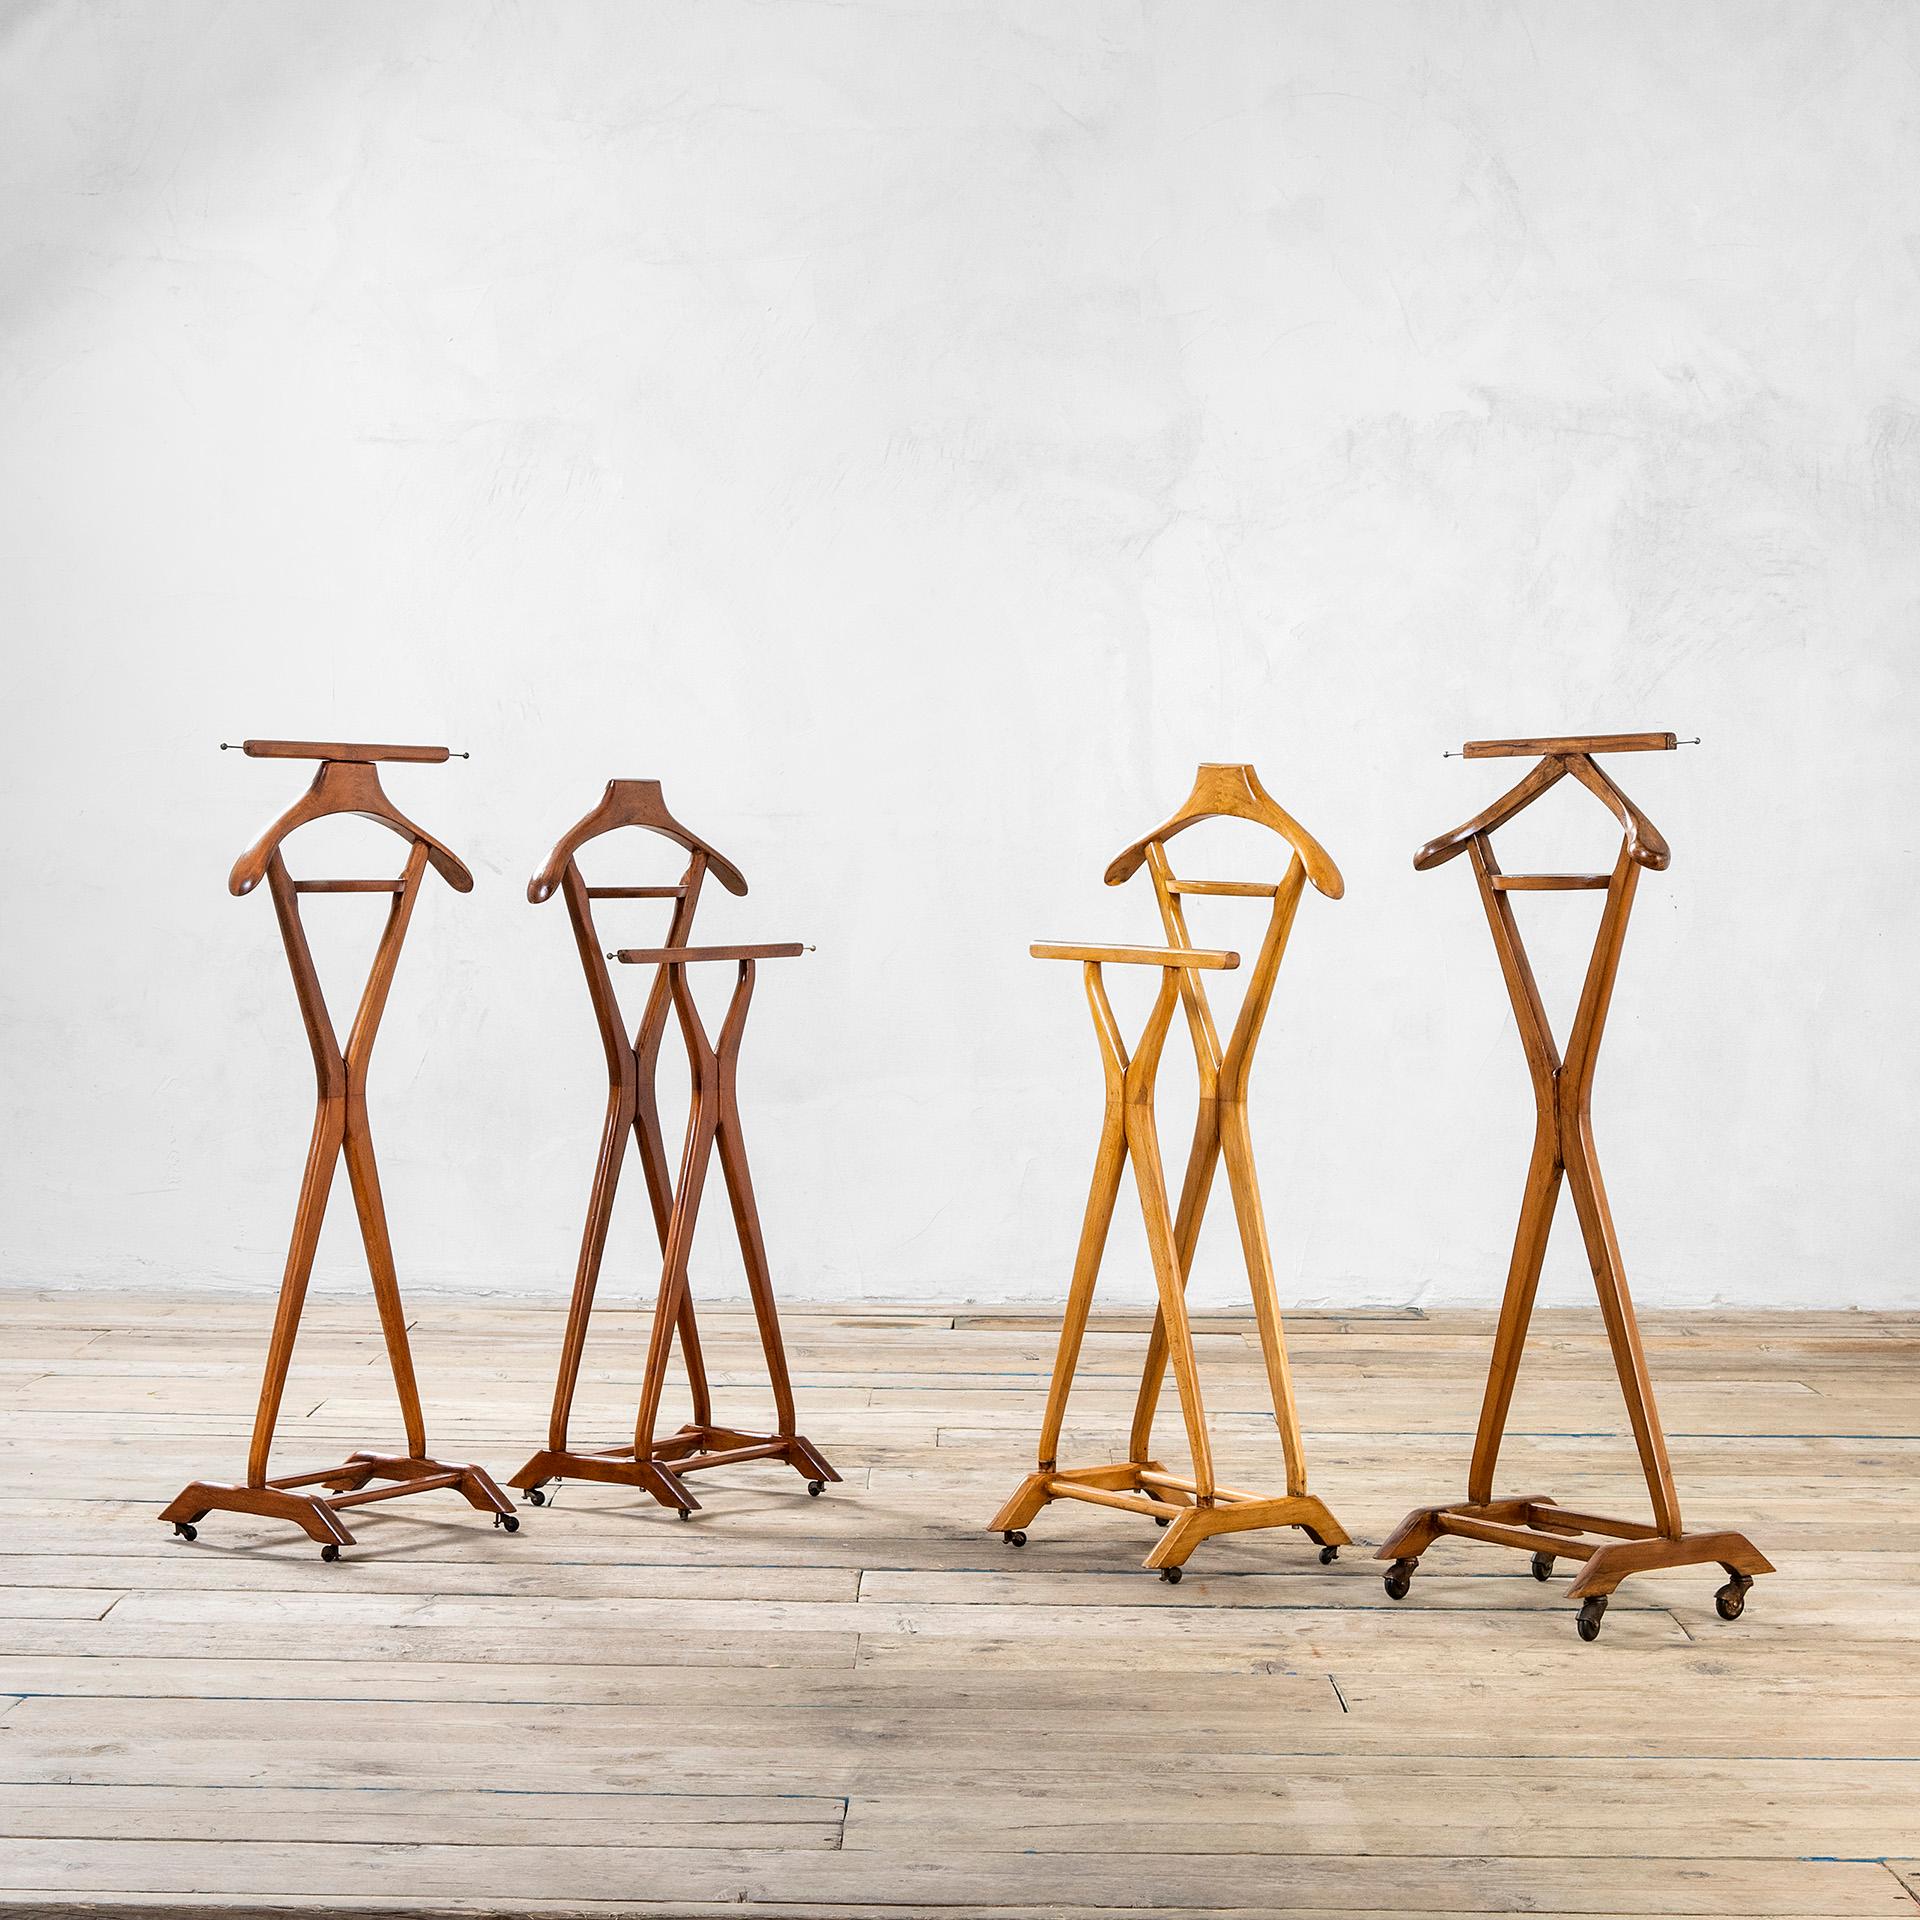 20th Century Ico Parisi Double Coat Rack in Wood with Metal Casters, Dark, 1950s For Sale 2